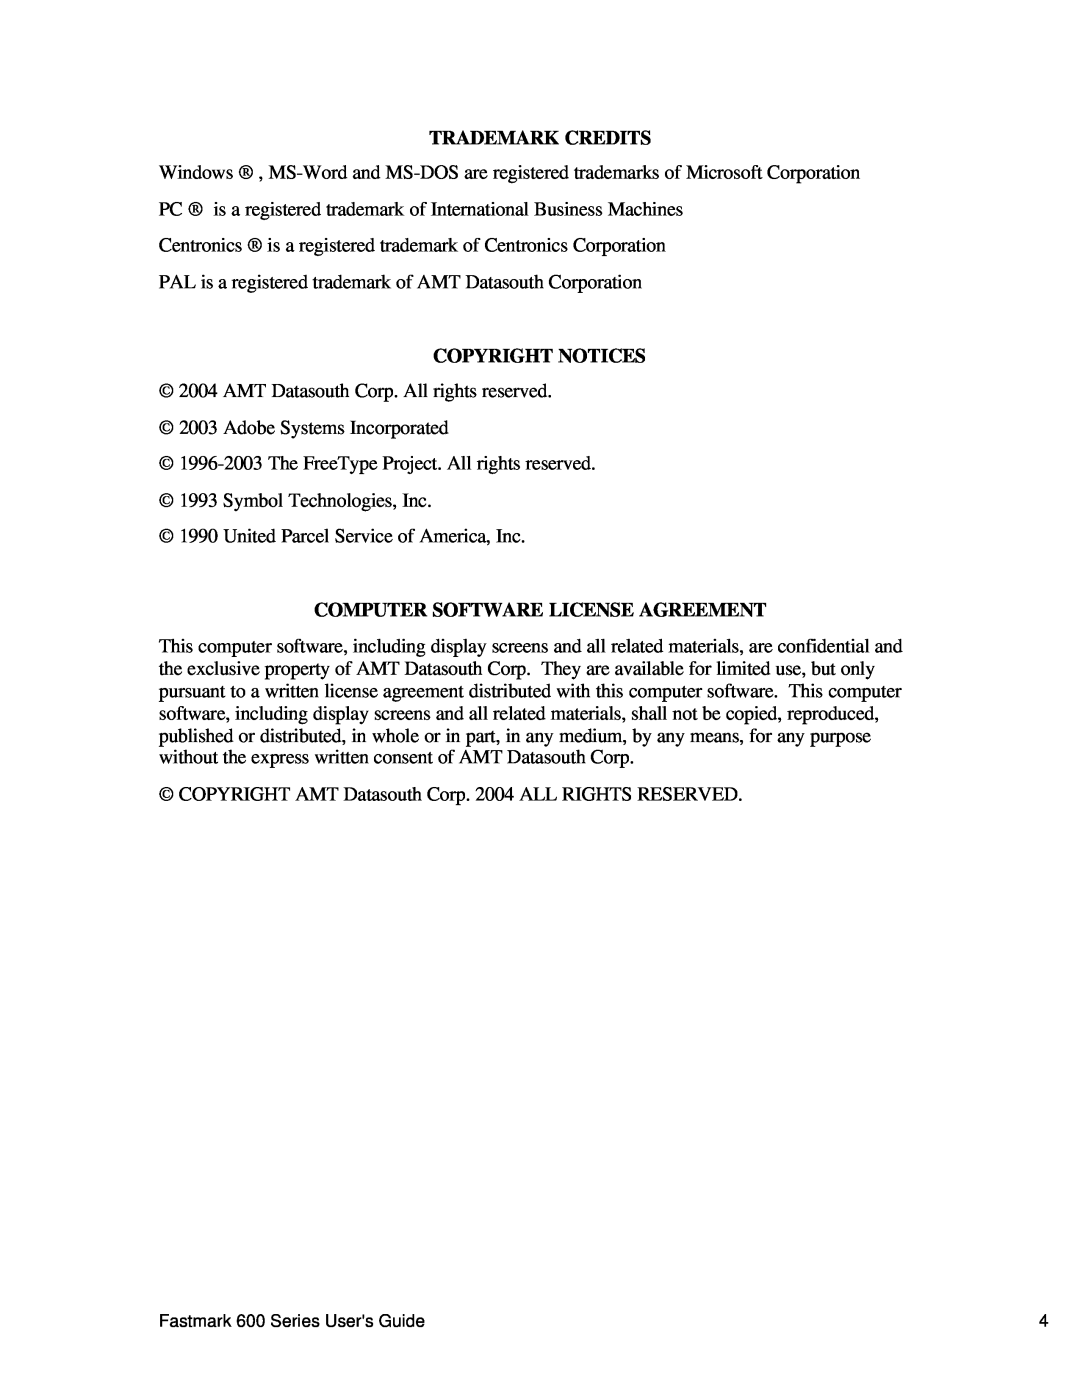 AMT Datasouth 600 manual Trademark Credits, Copyright Notices, Computer Software License Agreement 